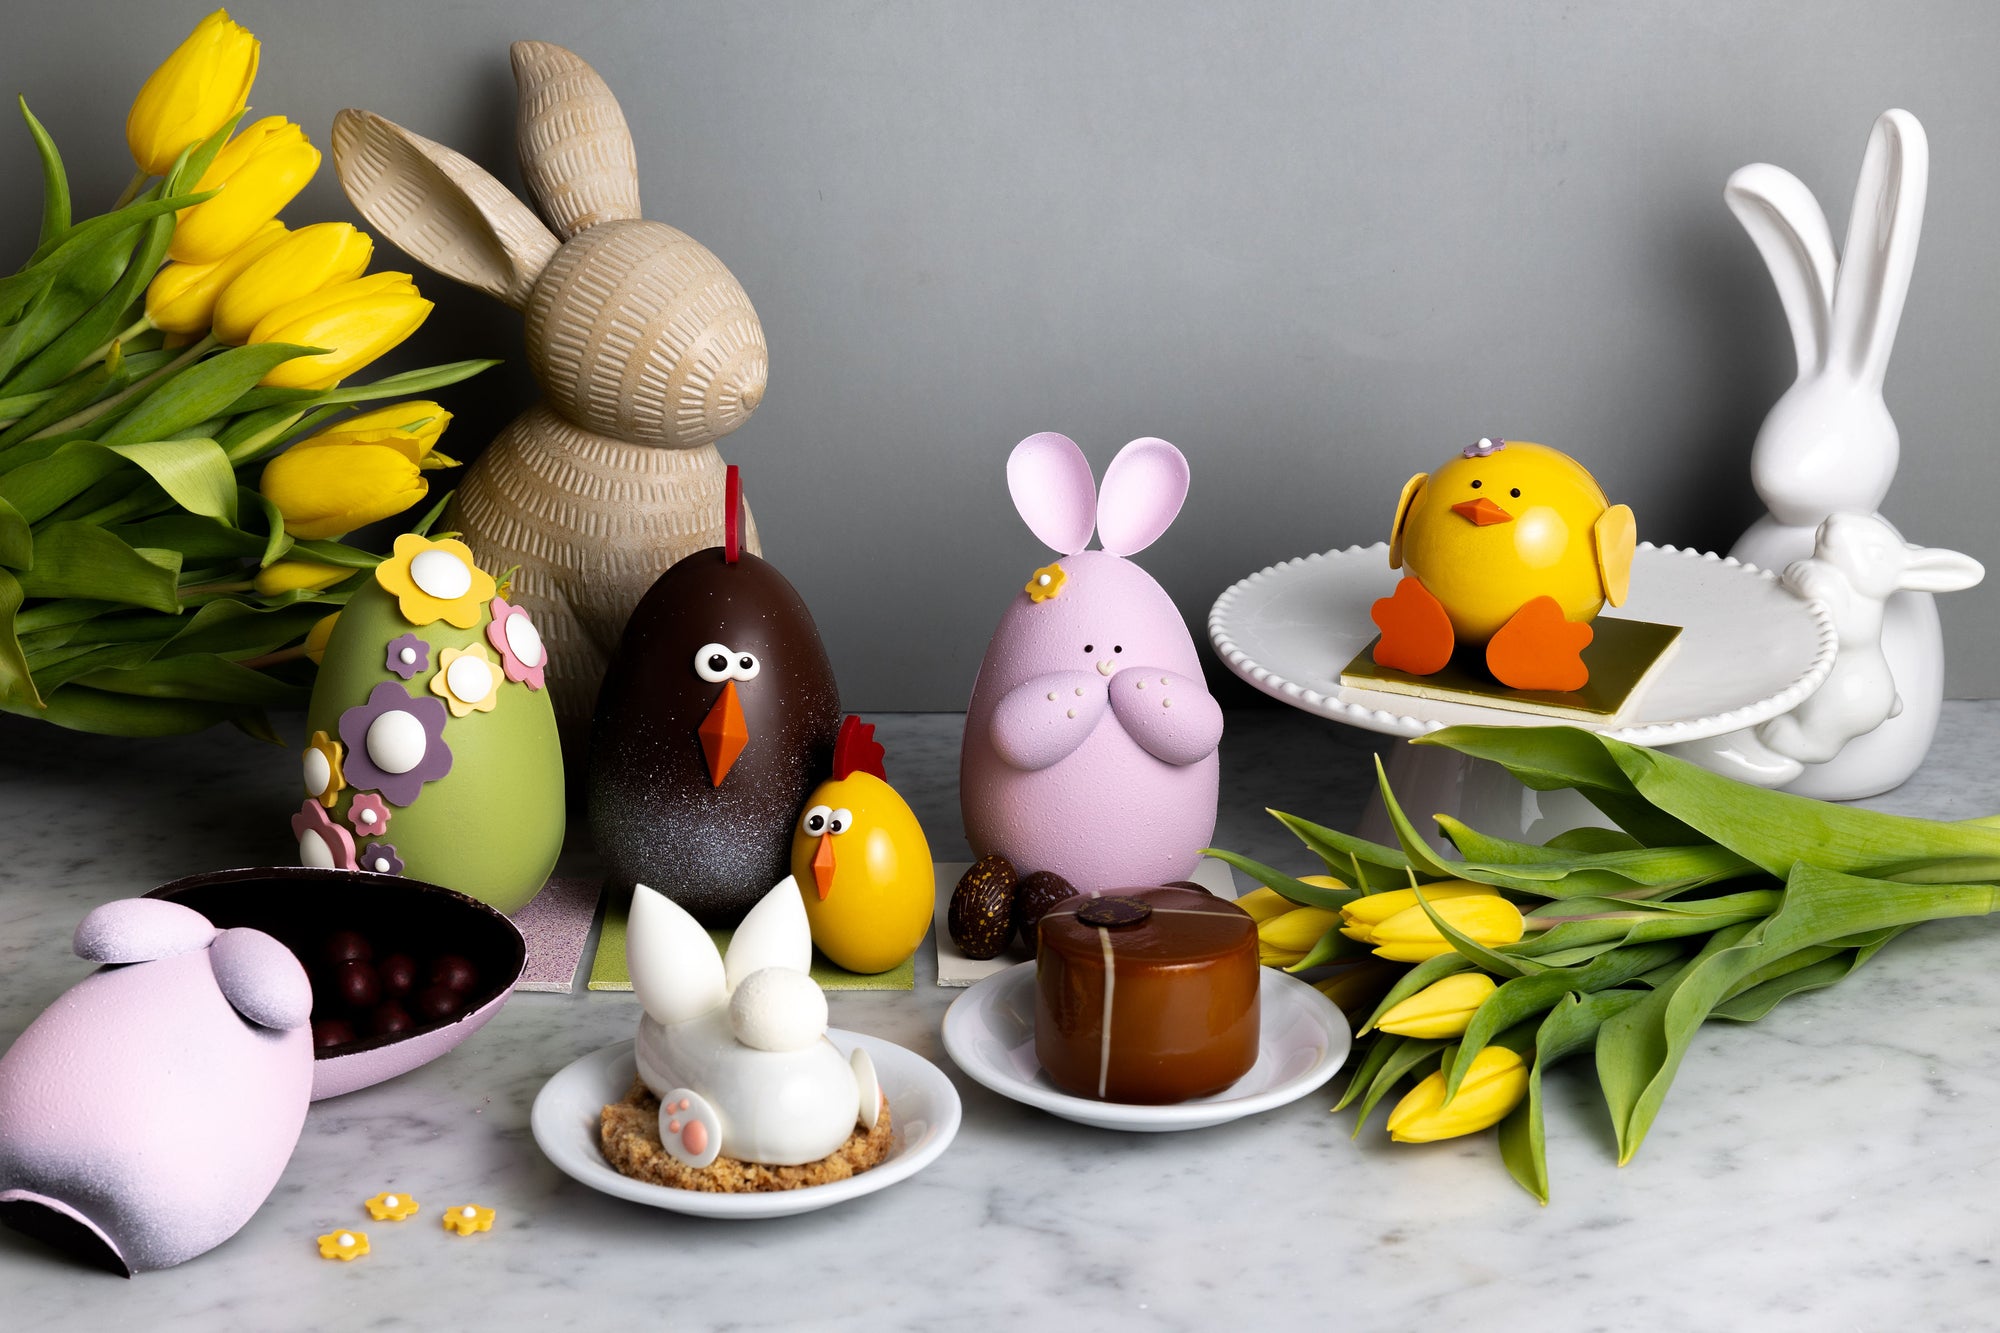 Best Easter gifts in Metro Vancouver, BC, chocolate bunny, chocolate eggs, easter basket ideas by Chez Christophe Chocolate Shop